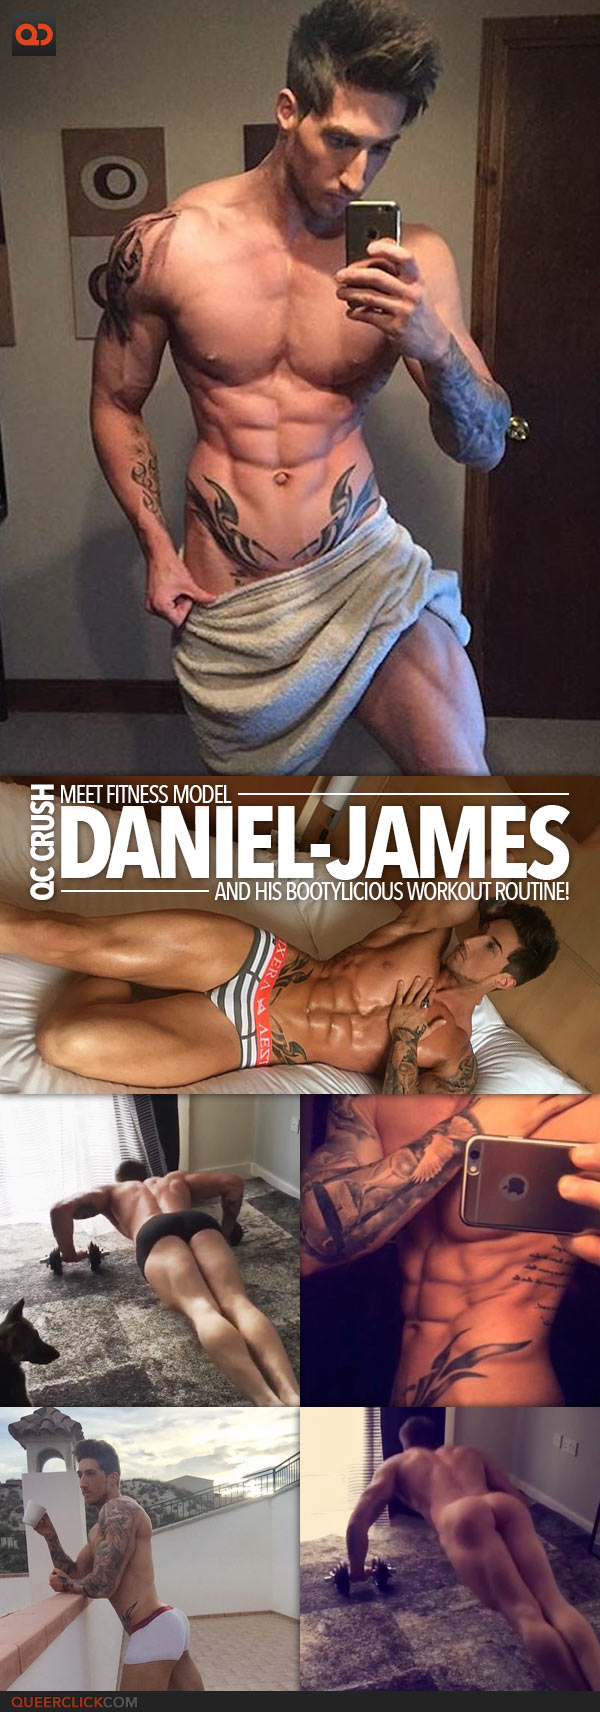 QC Crush: Meet Fitness Model Daniel-James And His Bootylicious Workout Routine!